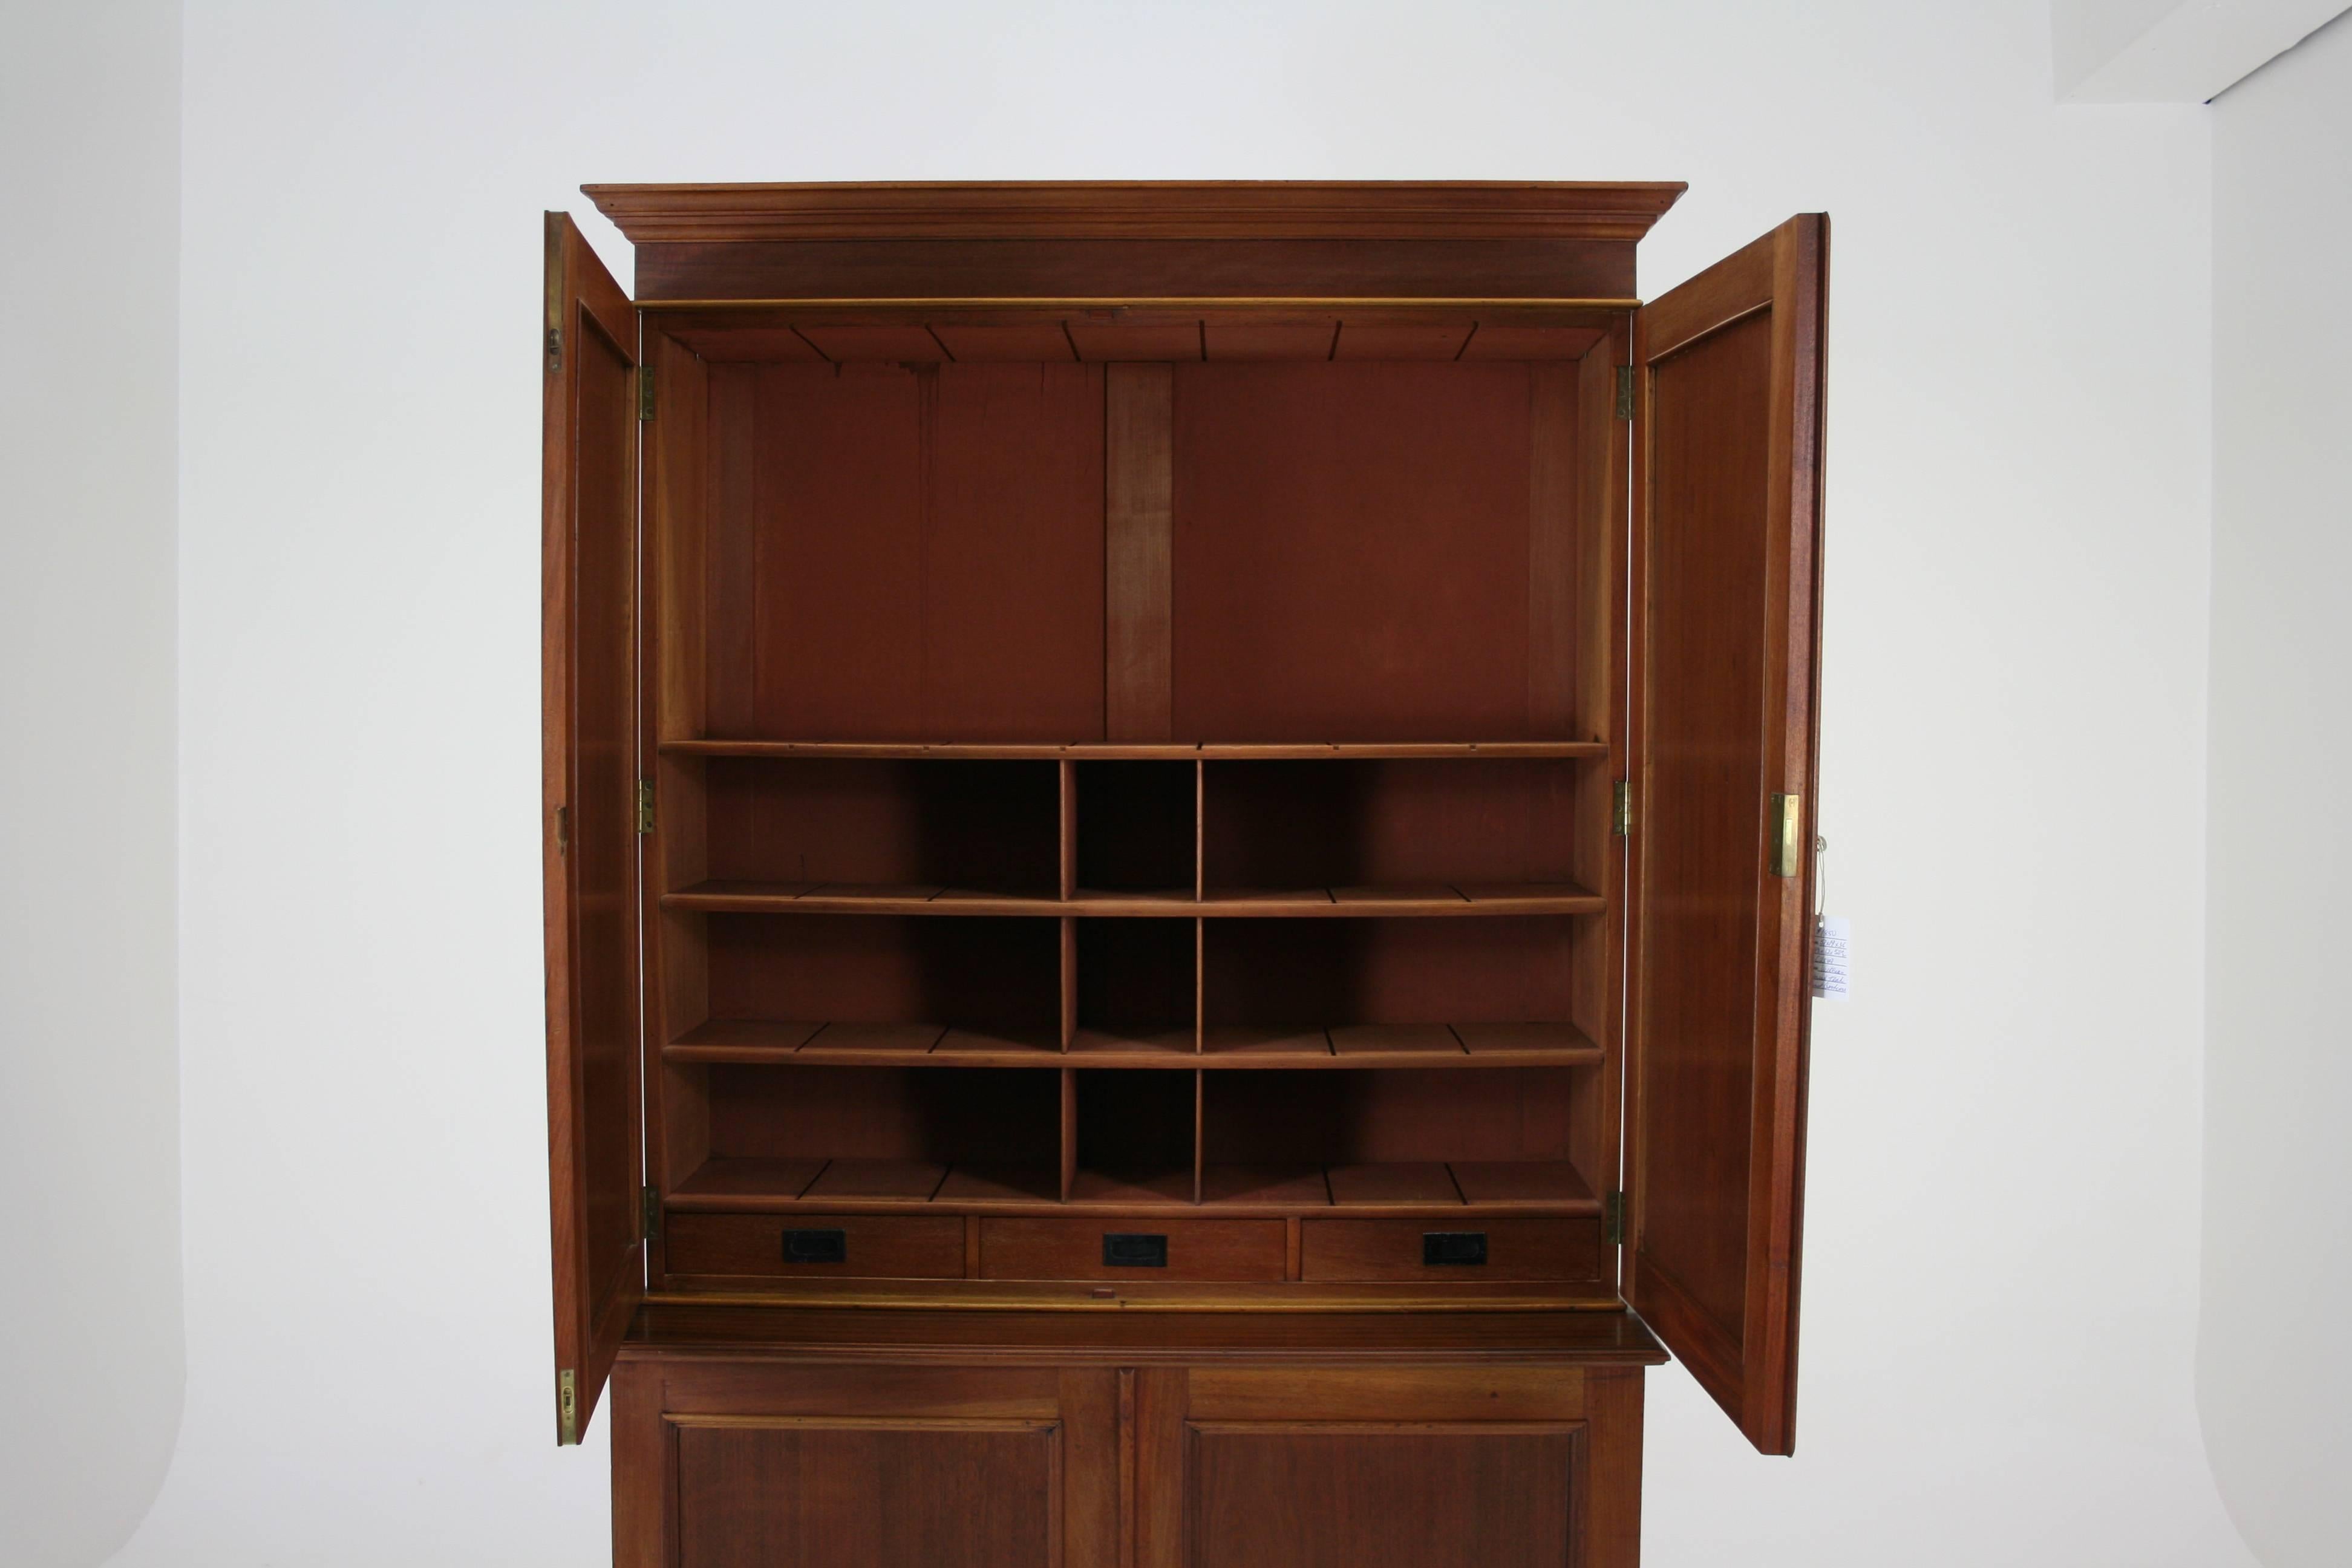 Scotland
1870
Solid mahogany construction
All original
Two panelled doors above fitted with various compartments and three drawers
Two panelled doors below fitted with two larger drawers and two shelves
Separates into two pieces for